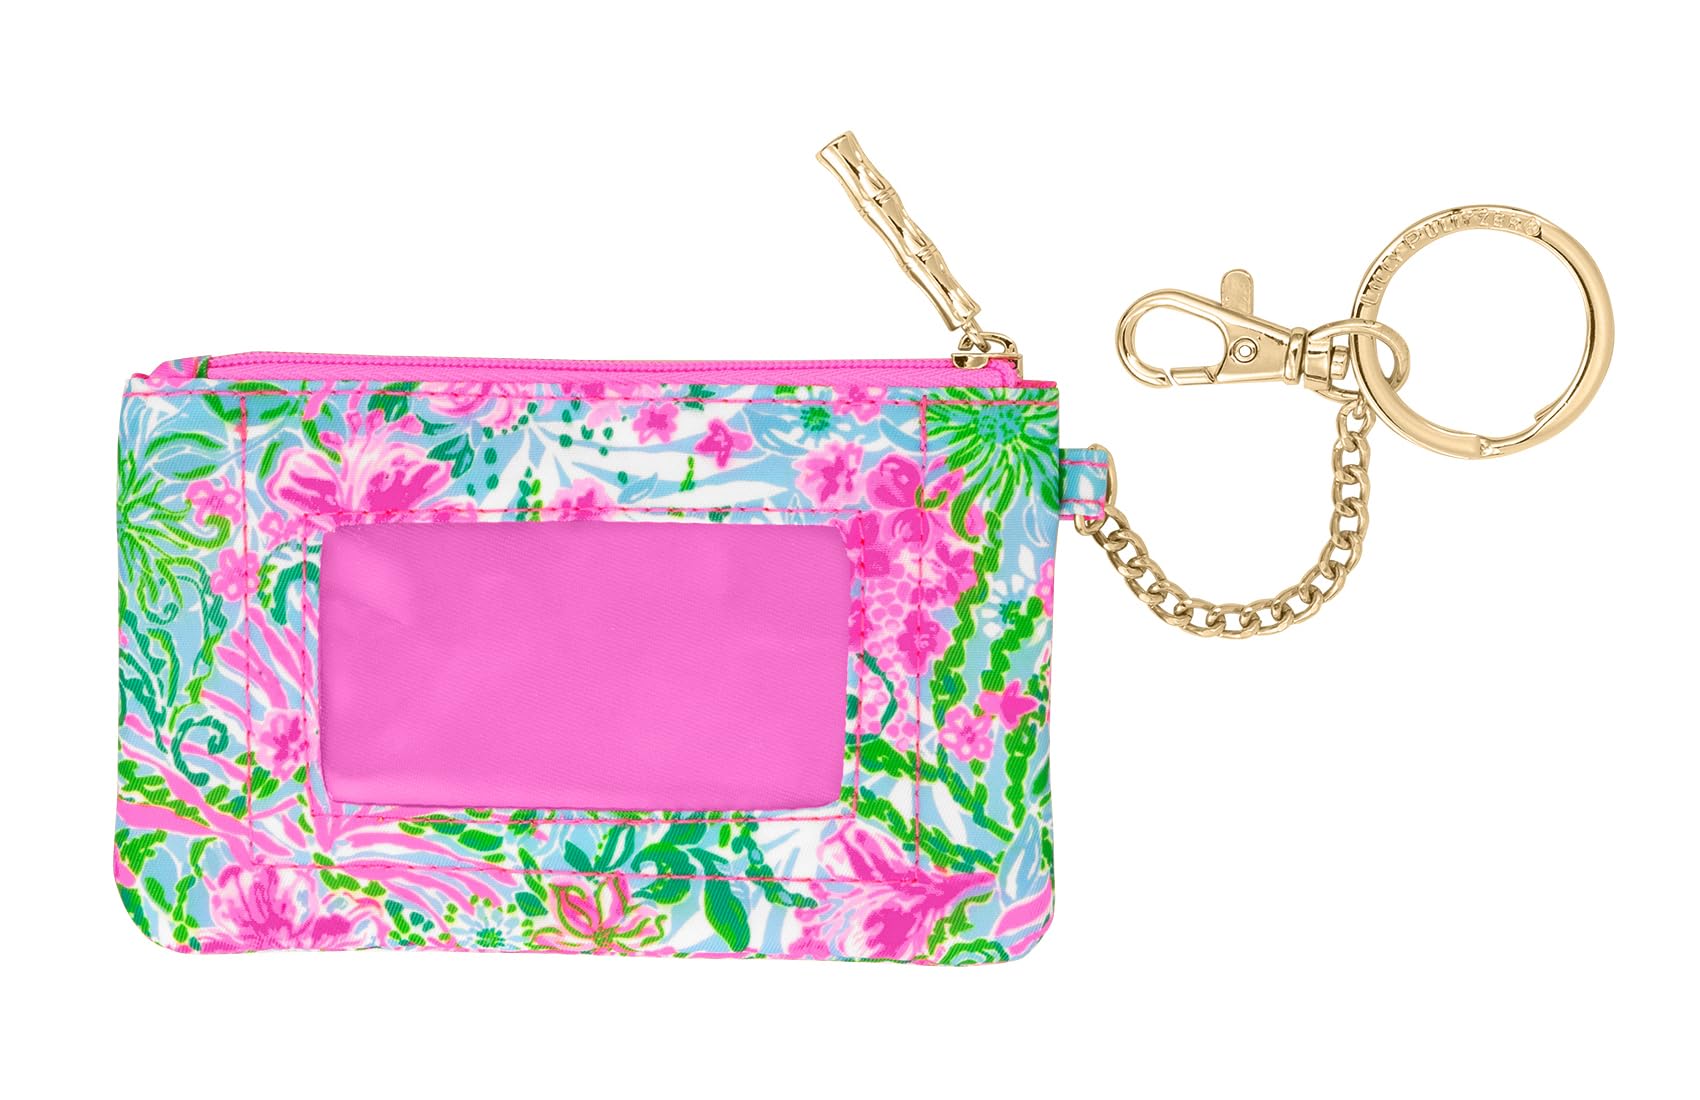 Lilly Pulitzer ID Holder Wallet, Wallet with Zip Close, Cute Card and ID Case for Women, Leaf it Wild